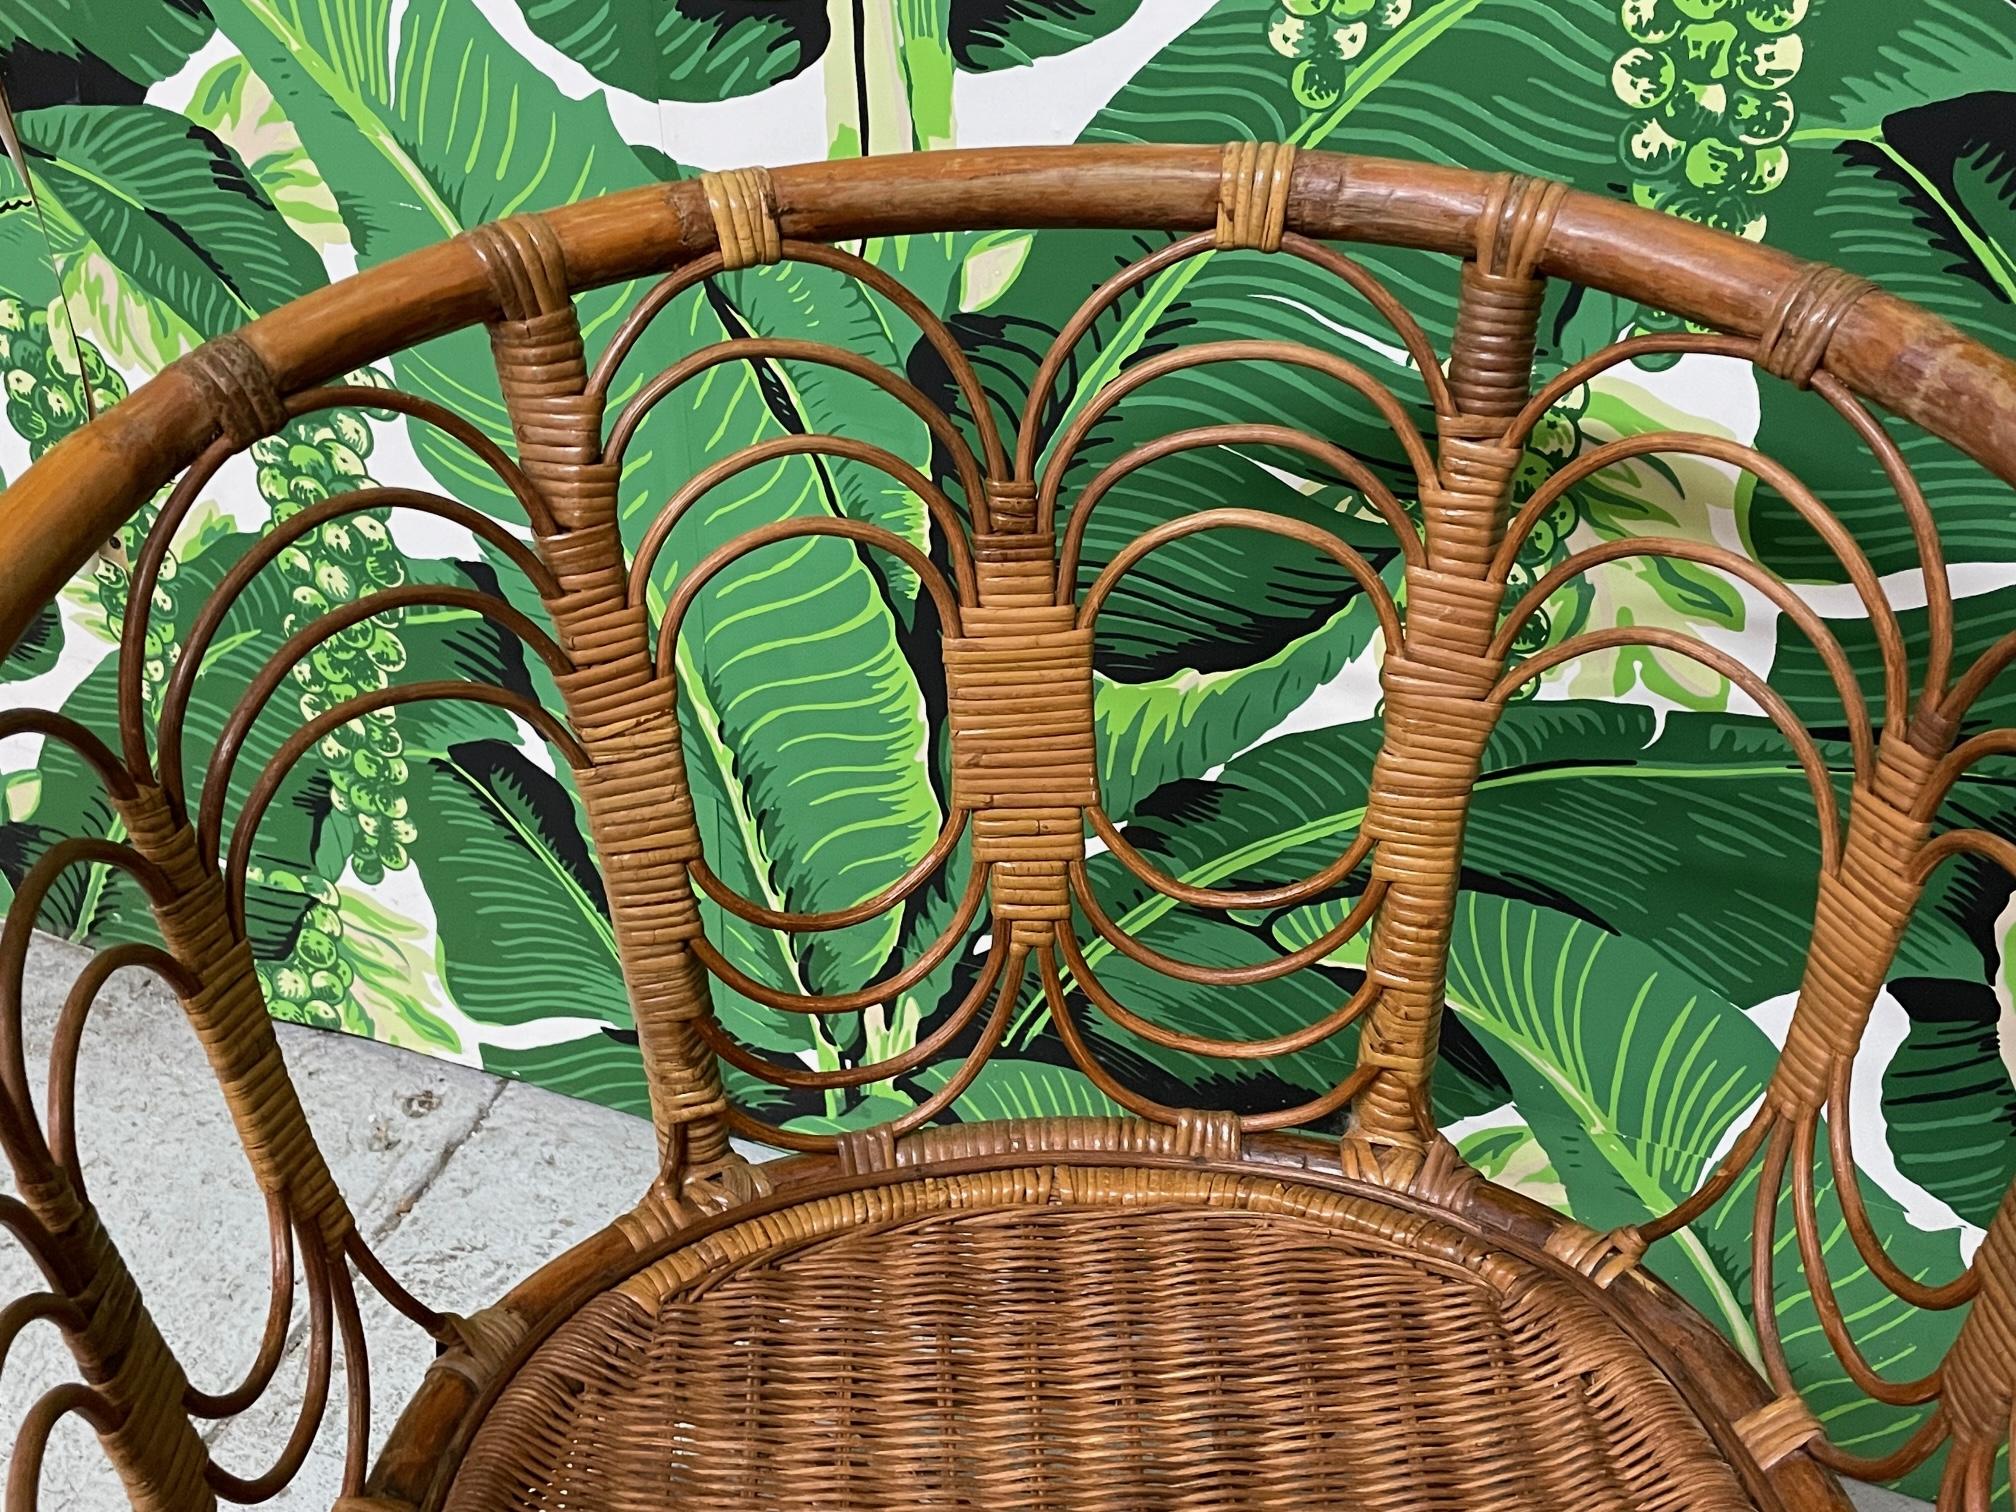 Organic Modern Vintage Rattan and Wicker Dining Set, Table and Four Chairs